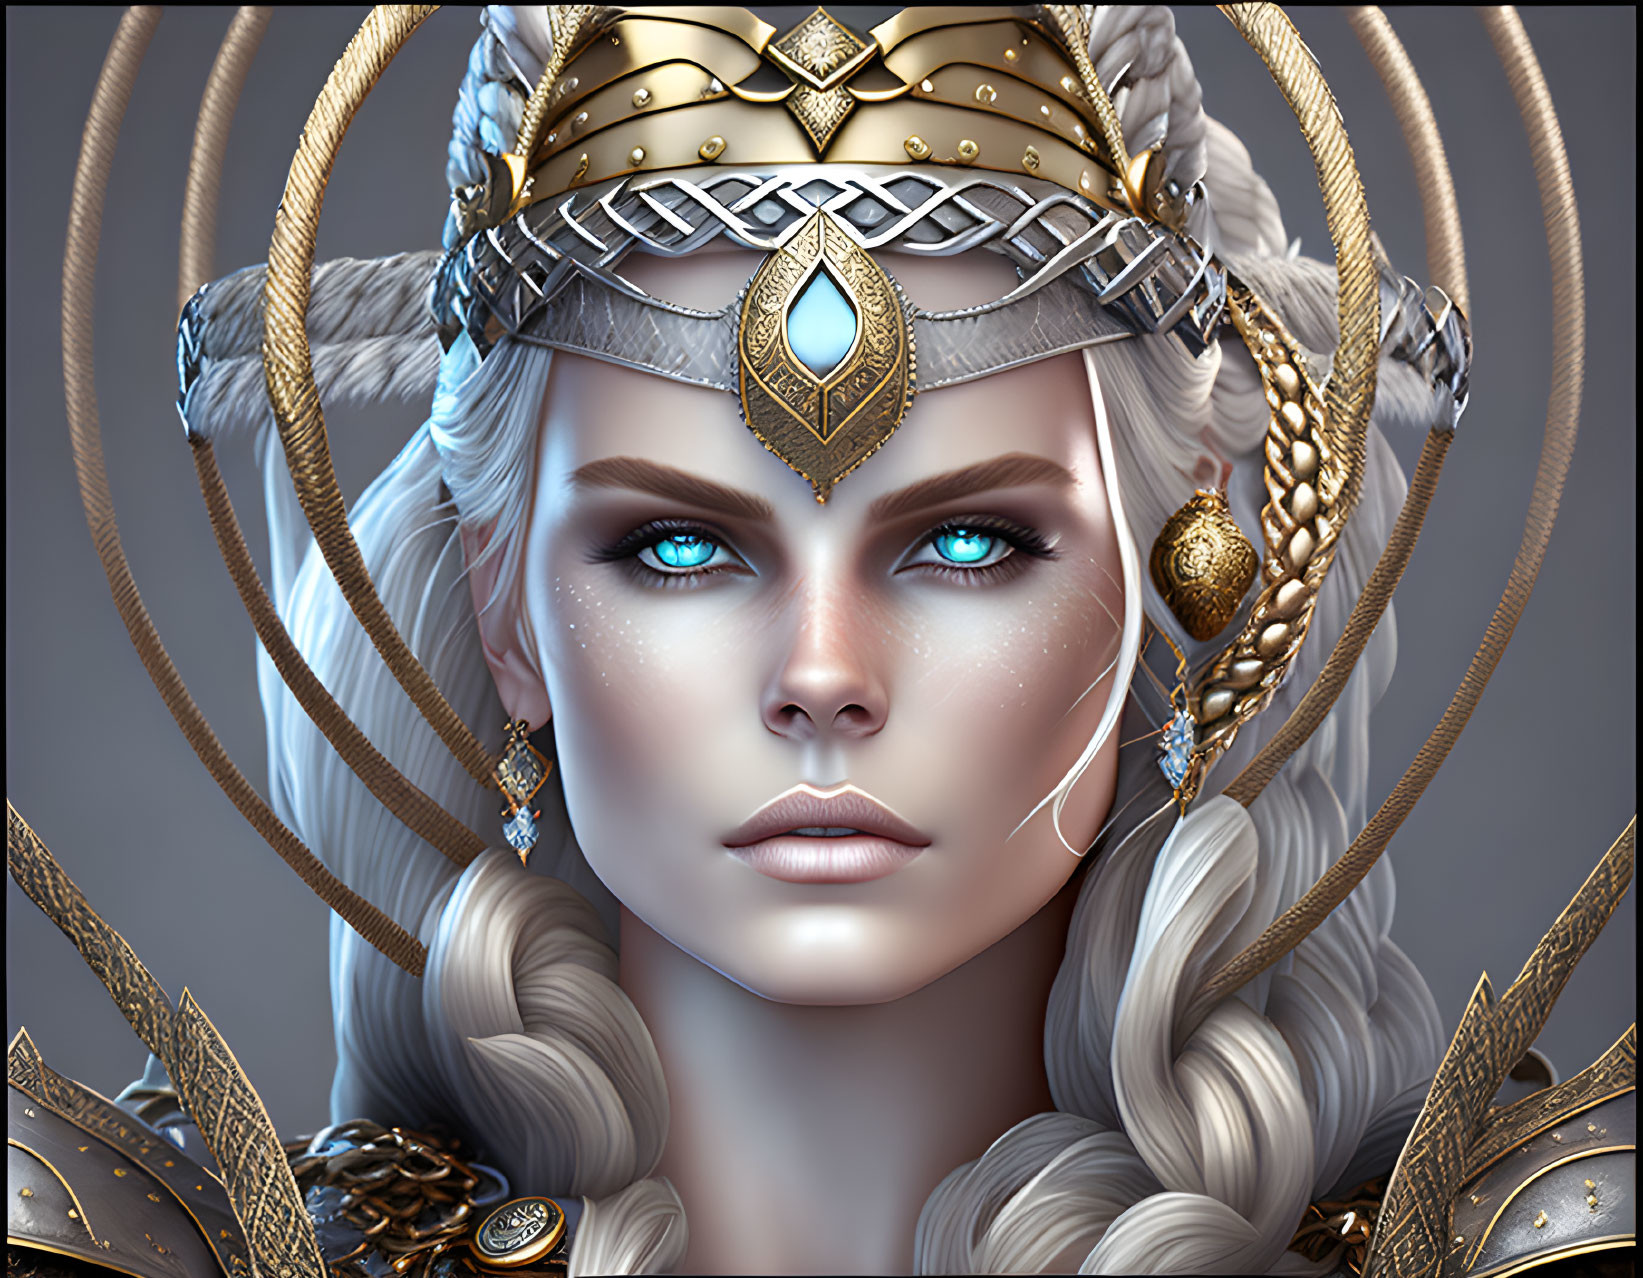 Fantasy Female Character with Blue Eyes in Golden Armor & Intricate Headdress